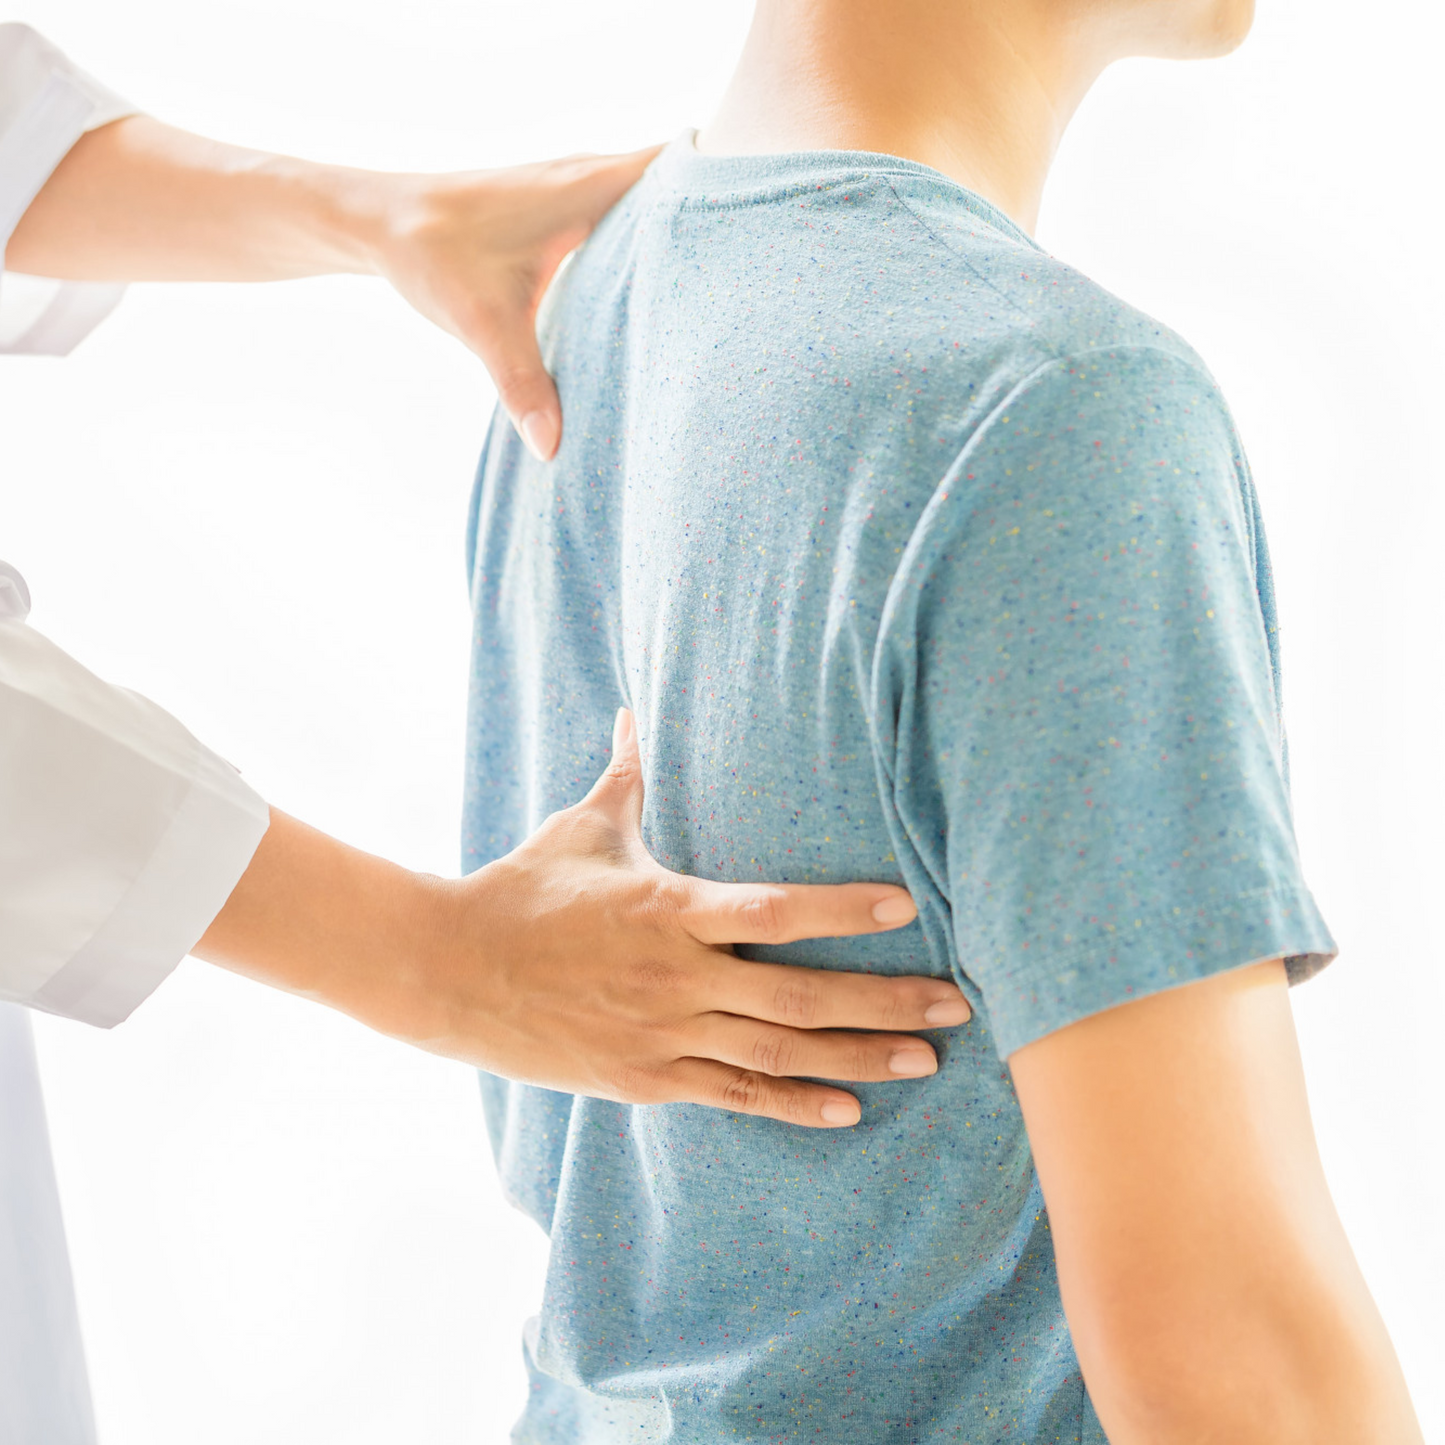 Chiropractic Spine Treatment